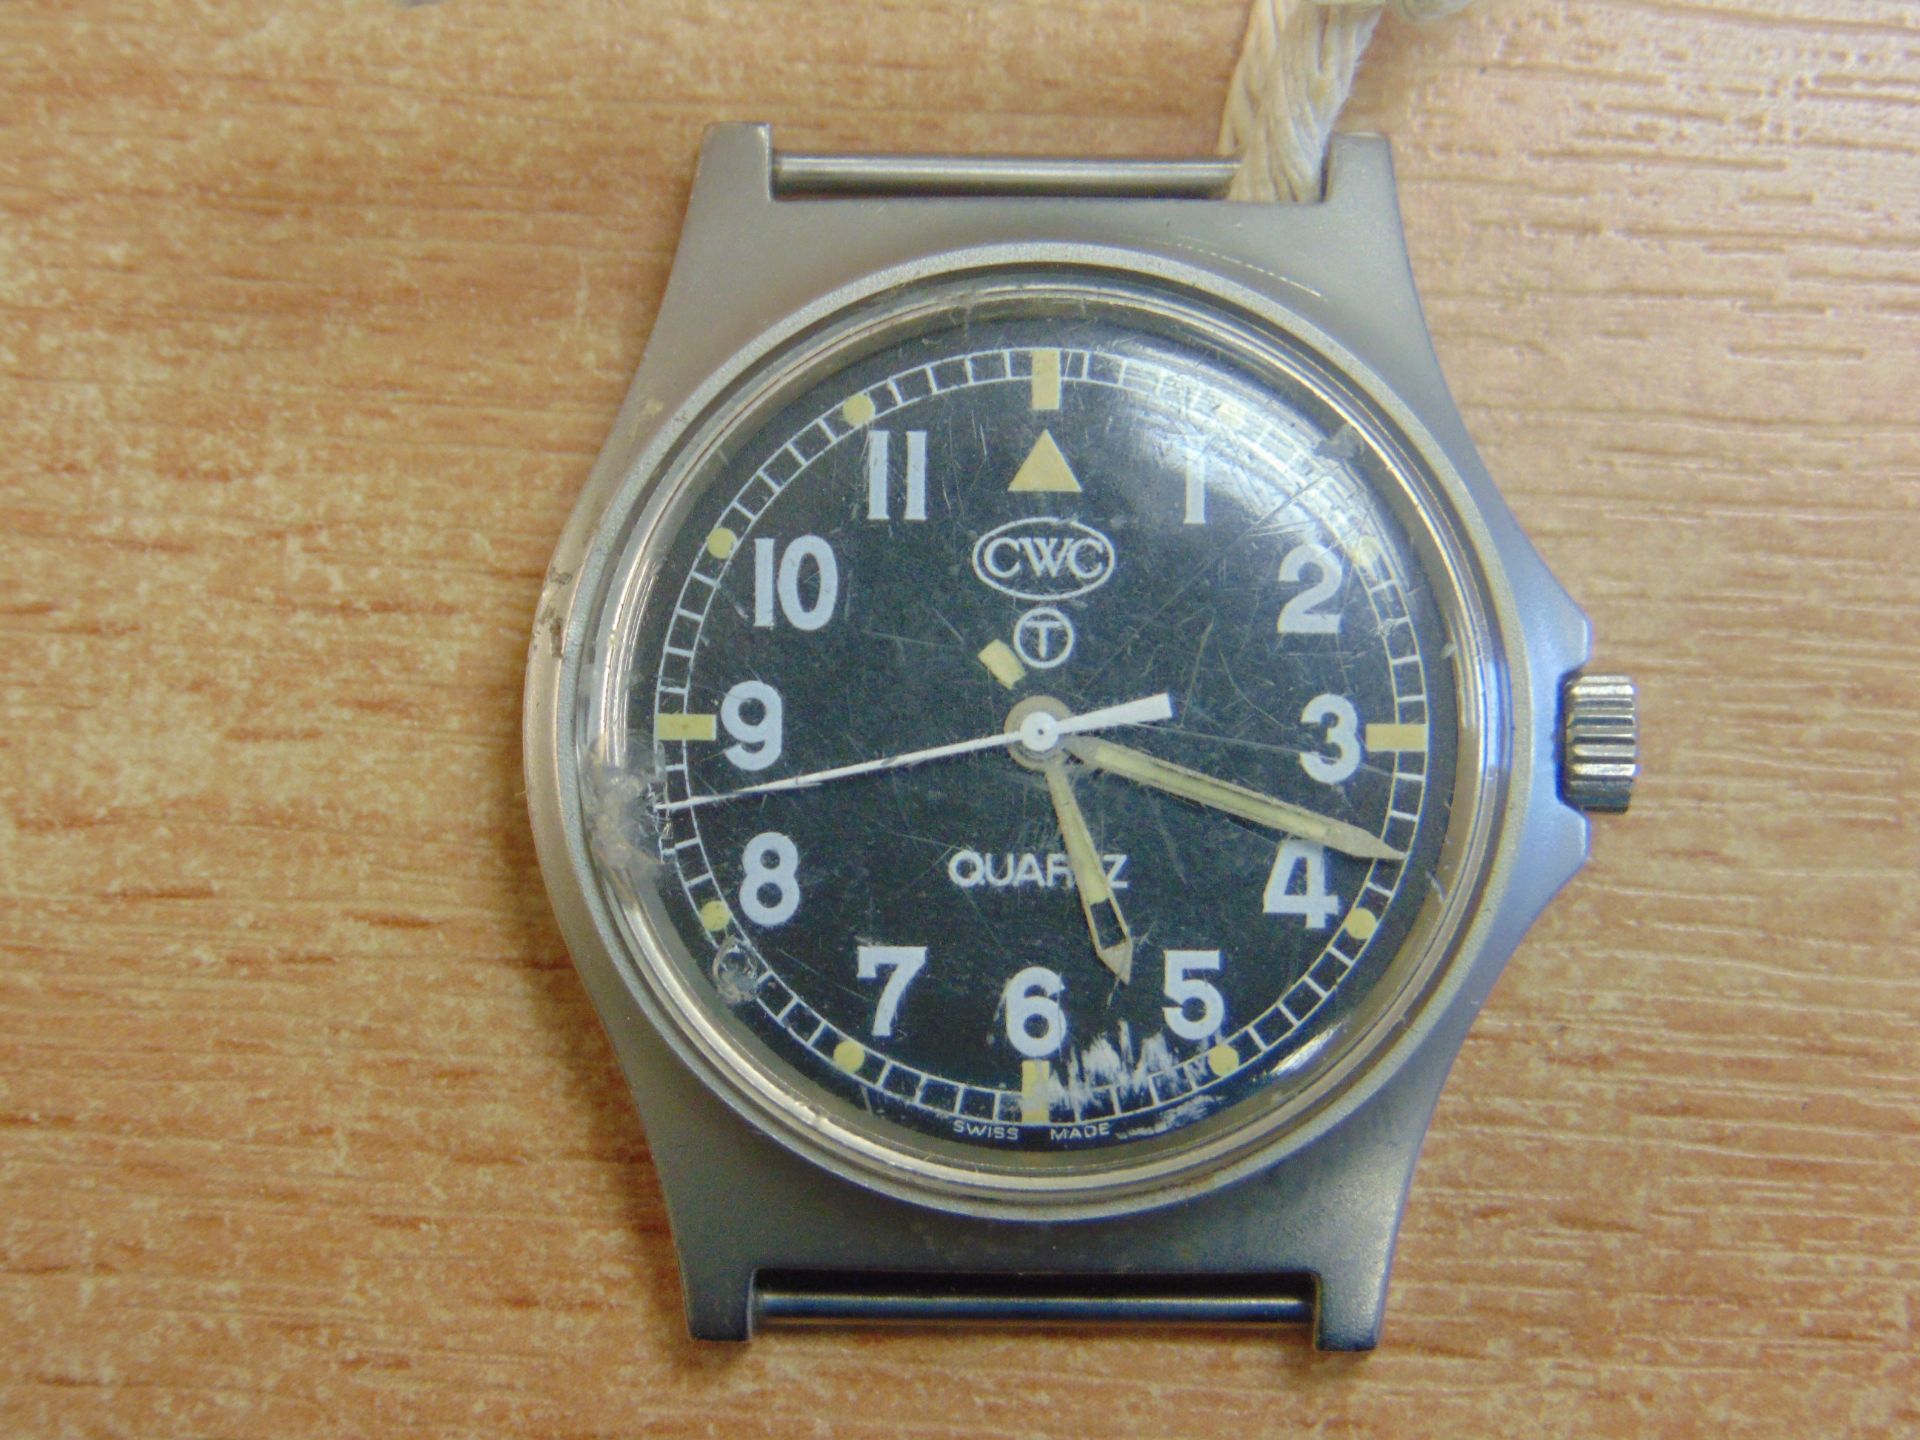 CWC W10 BRITISH ARMY SERVICE WATCH NATO MARKS DATE 2005 WATER RESISTANT TO 5 ATM GLASS CHIPPED - Bild 4 aus 6